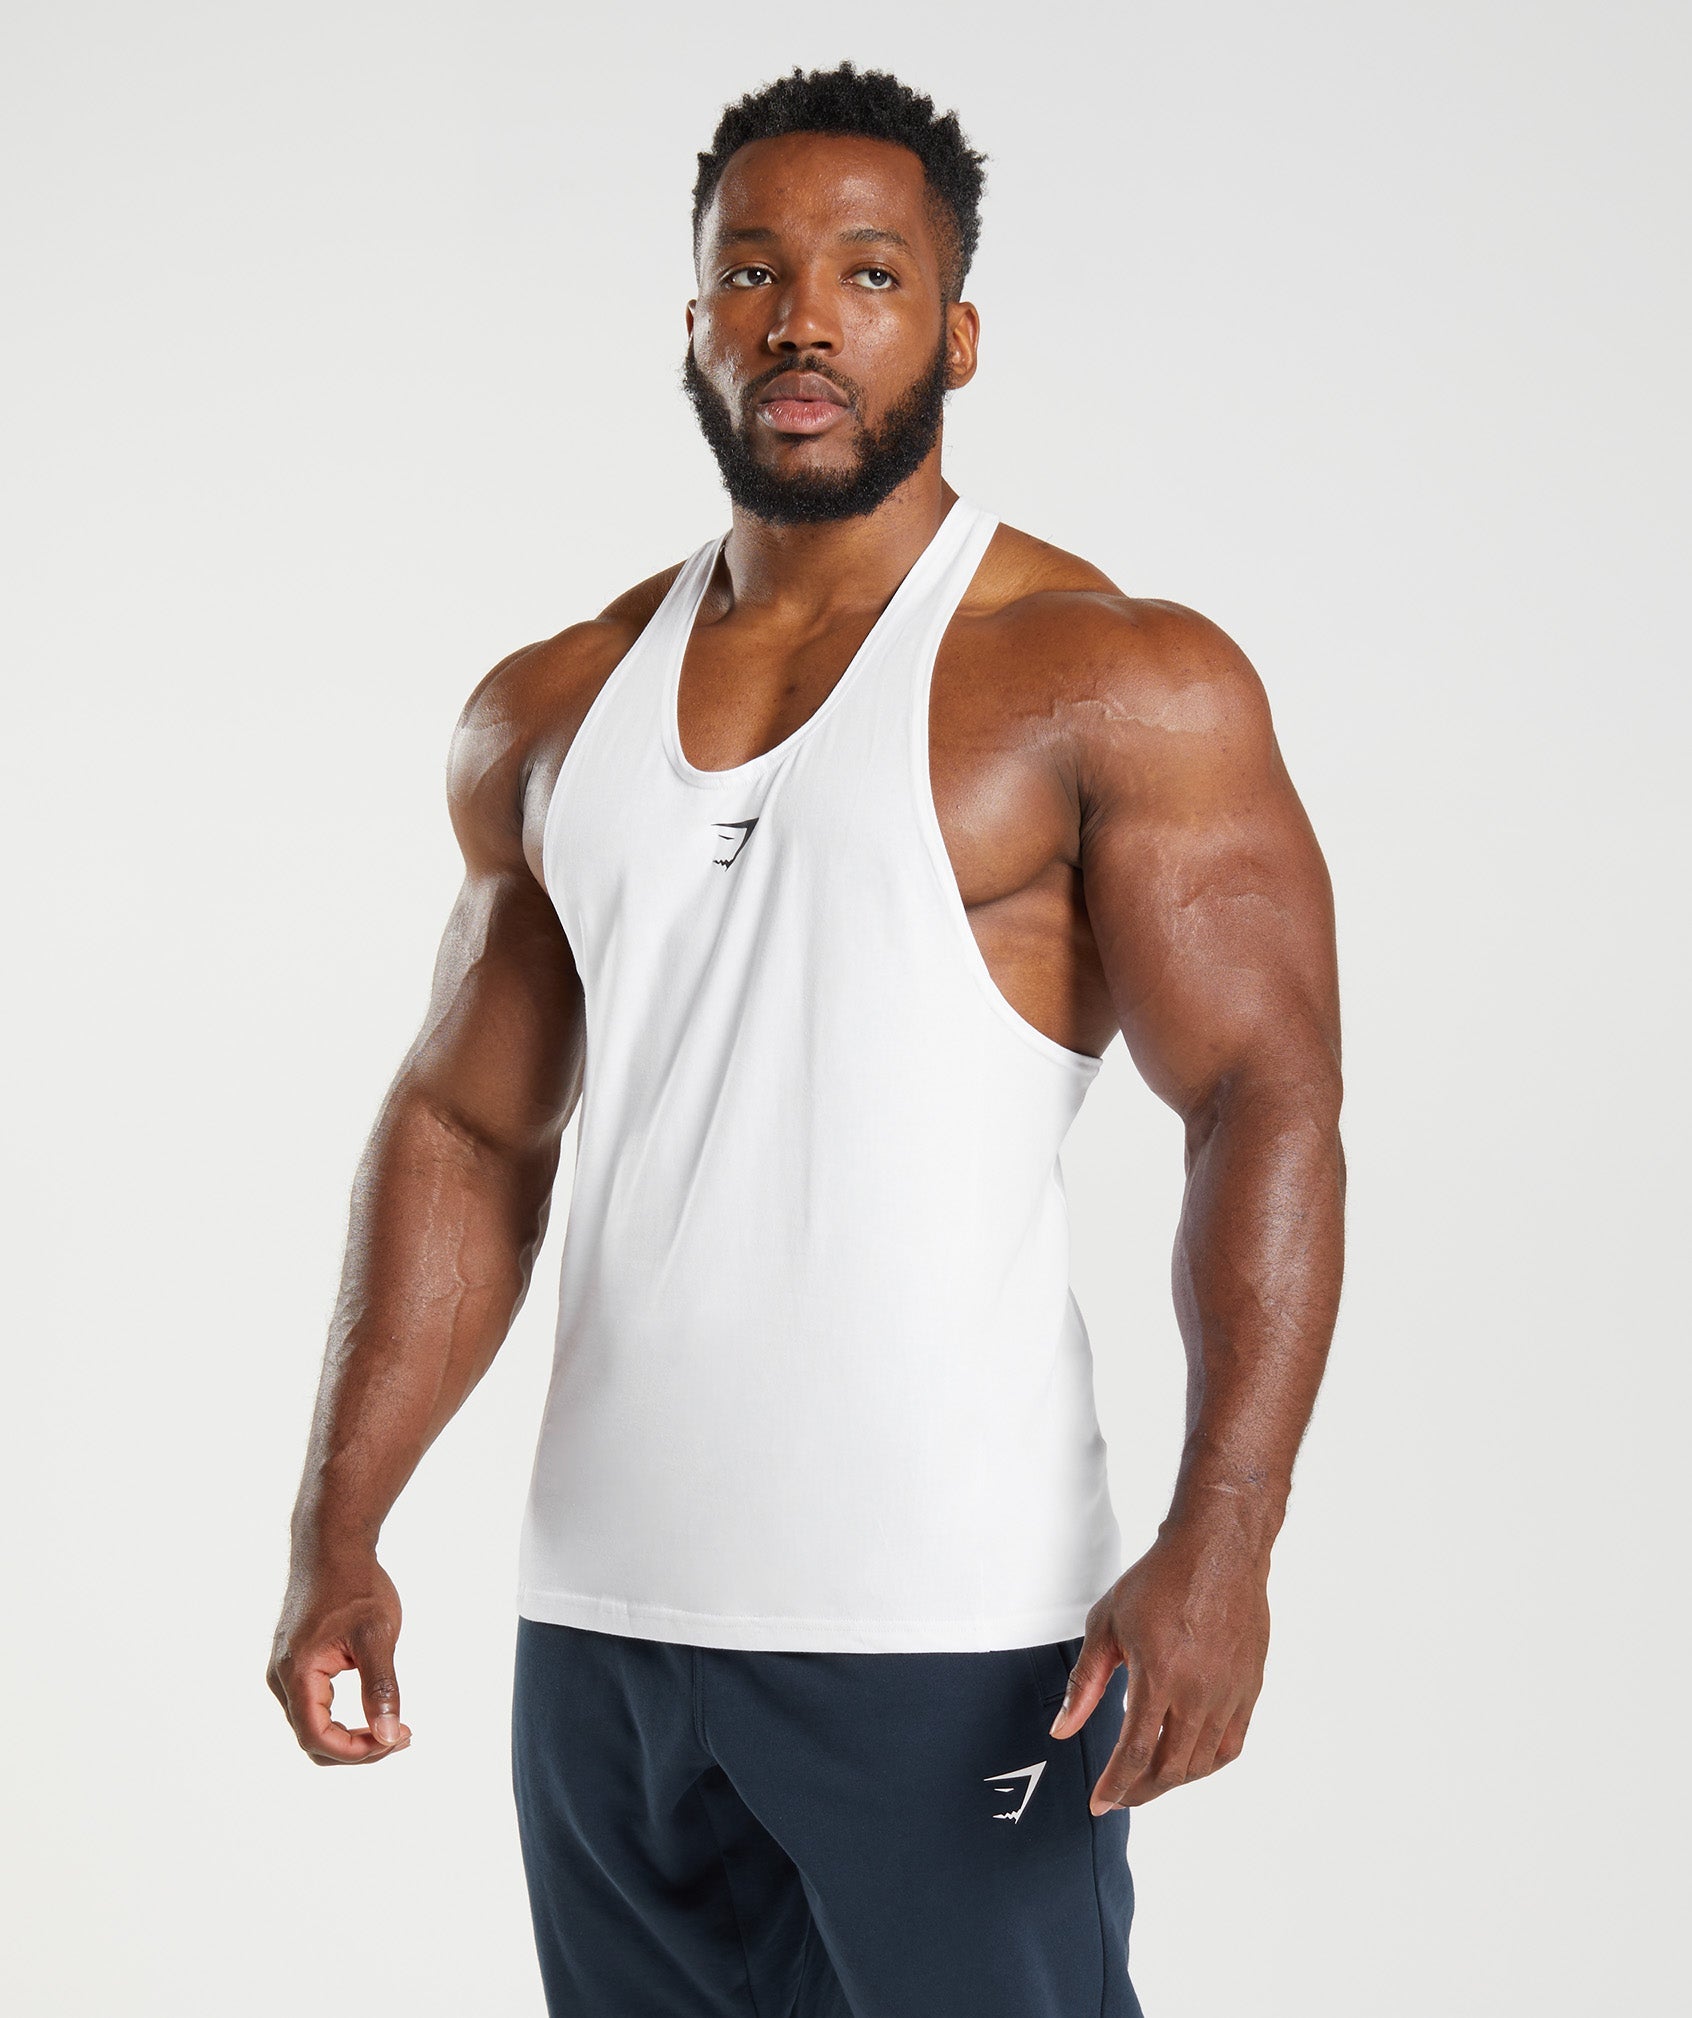 React Stringer in White is out of stock